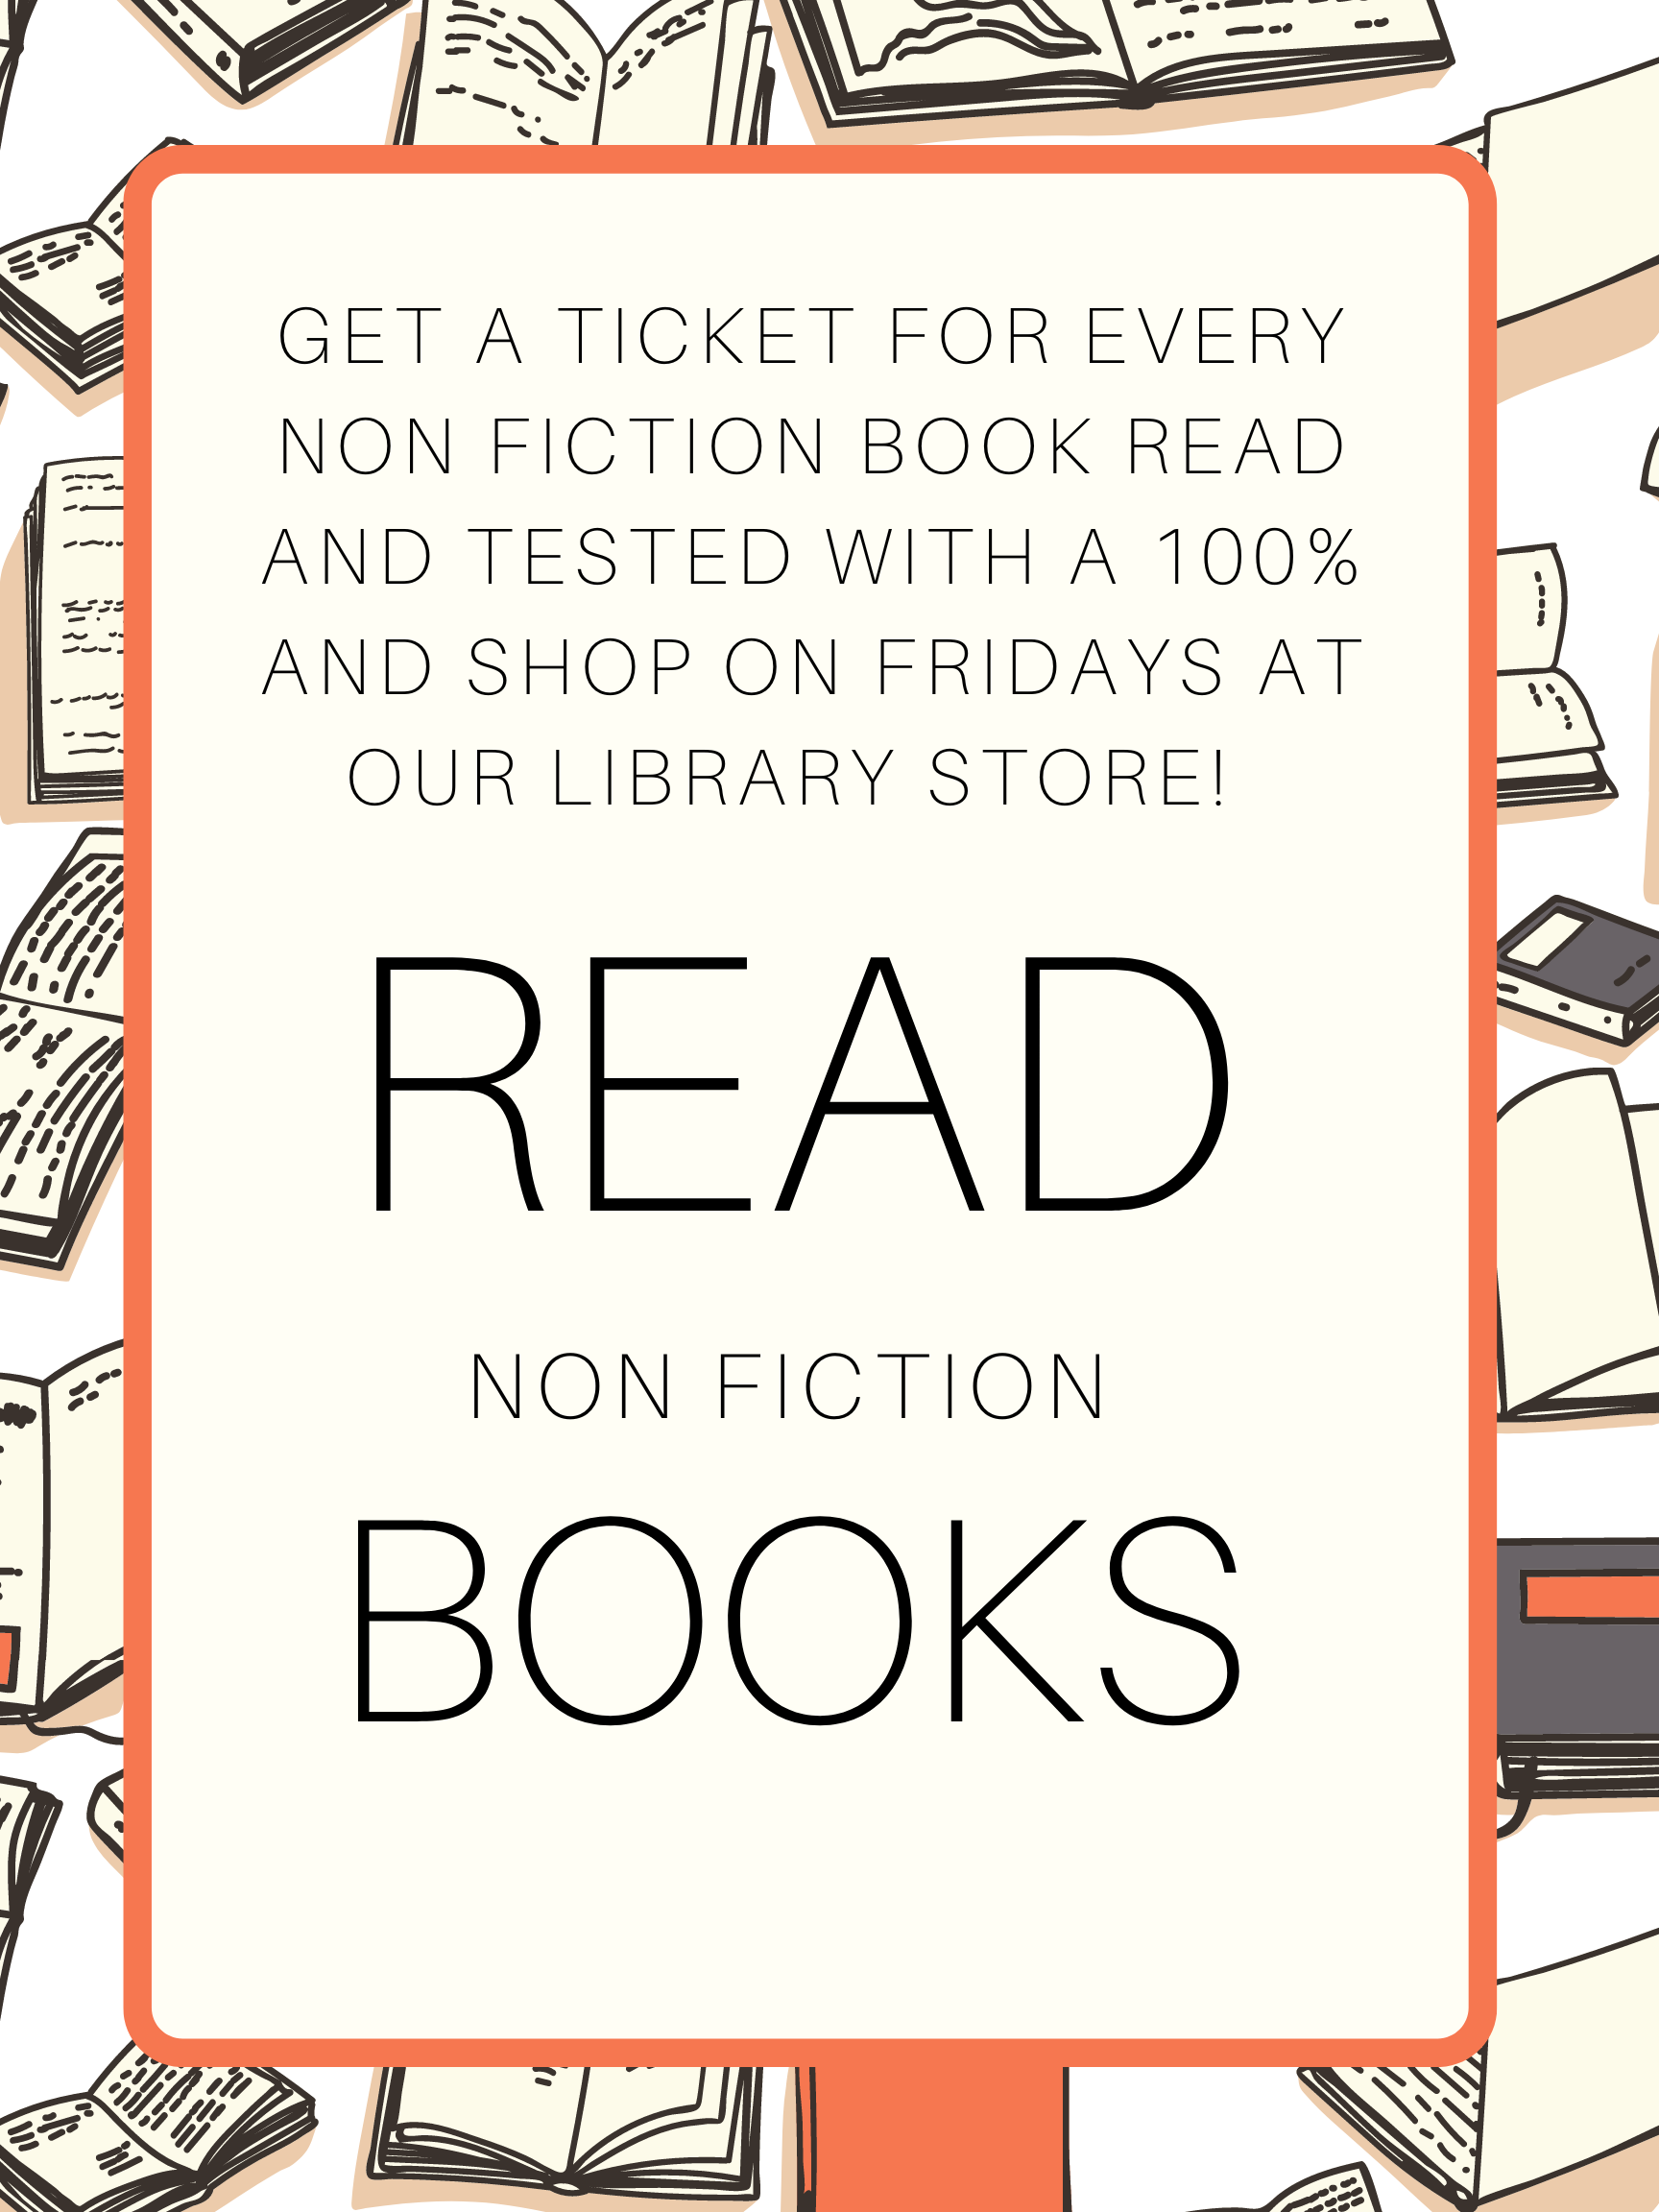 Get a tiCKet for every non fiction book read and testEd with A 100% and shop on fridays at our library store!  